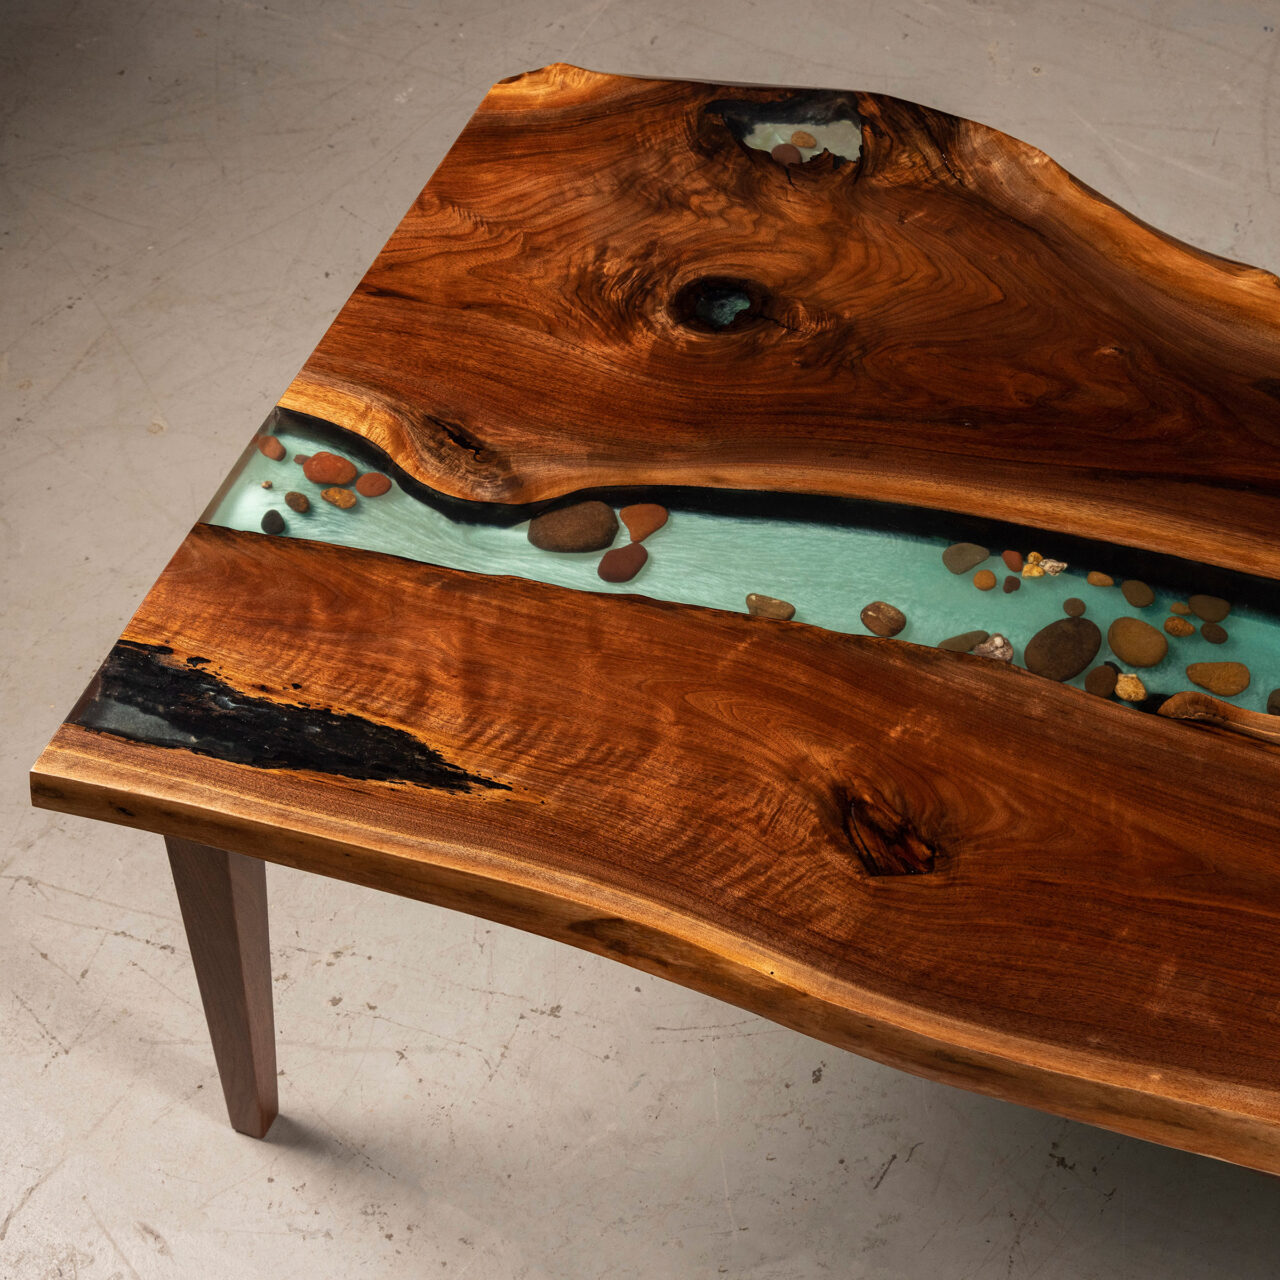 SENTIENT's epoxy river table is a masterpiece of craftsmanship, where the swirling patterns of natural wood are juxtaposed with a stream of translucent blue resin.